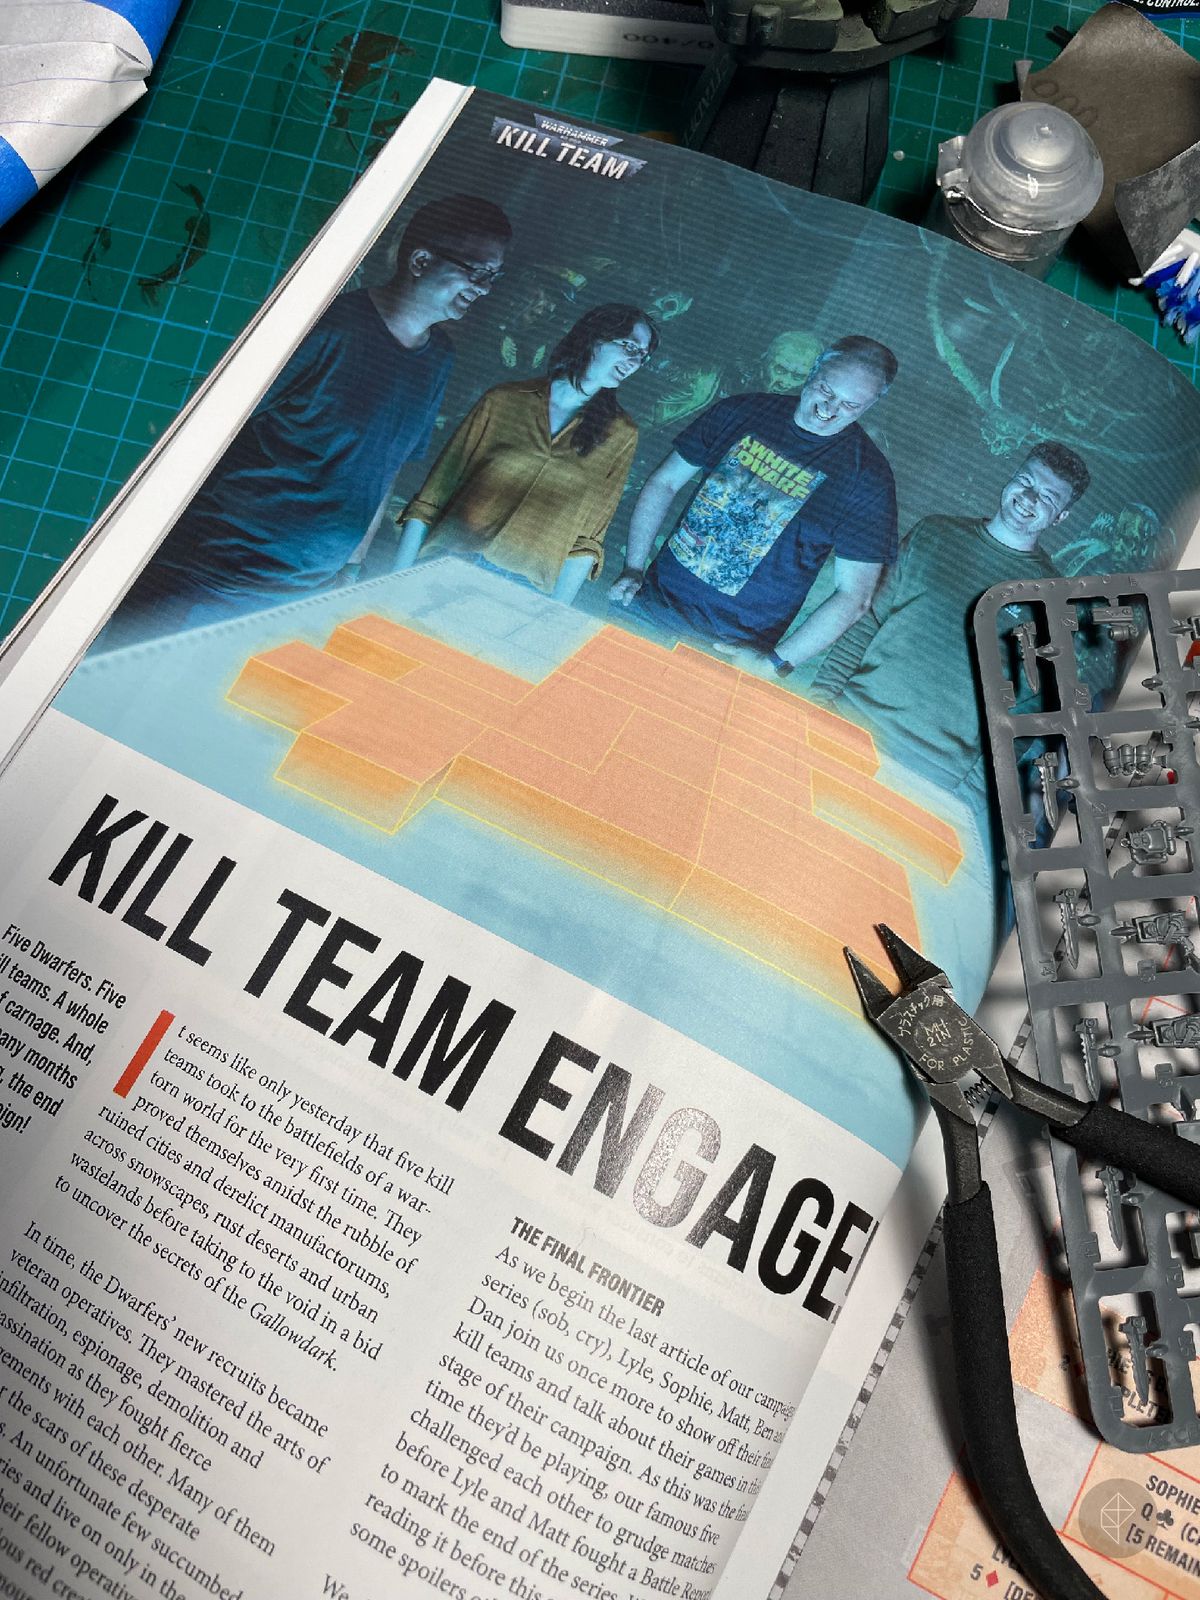 A page from White Dwarf showing a group of players around a virtual Kill Team map.